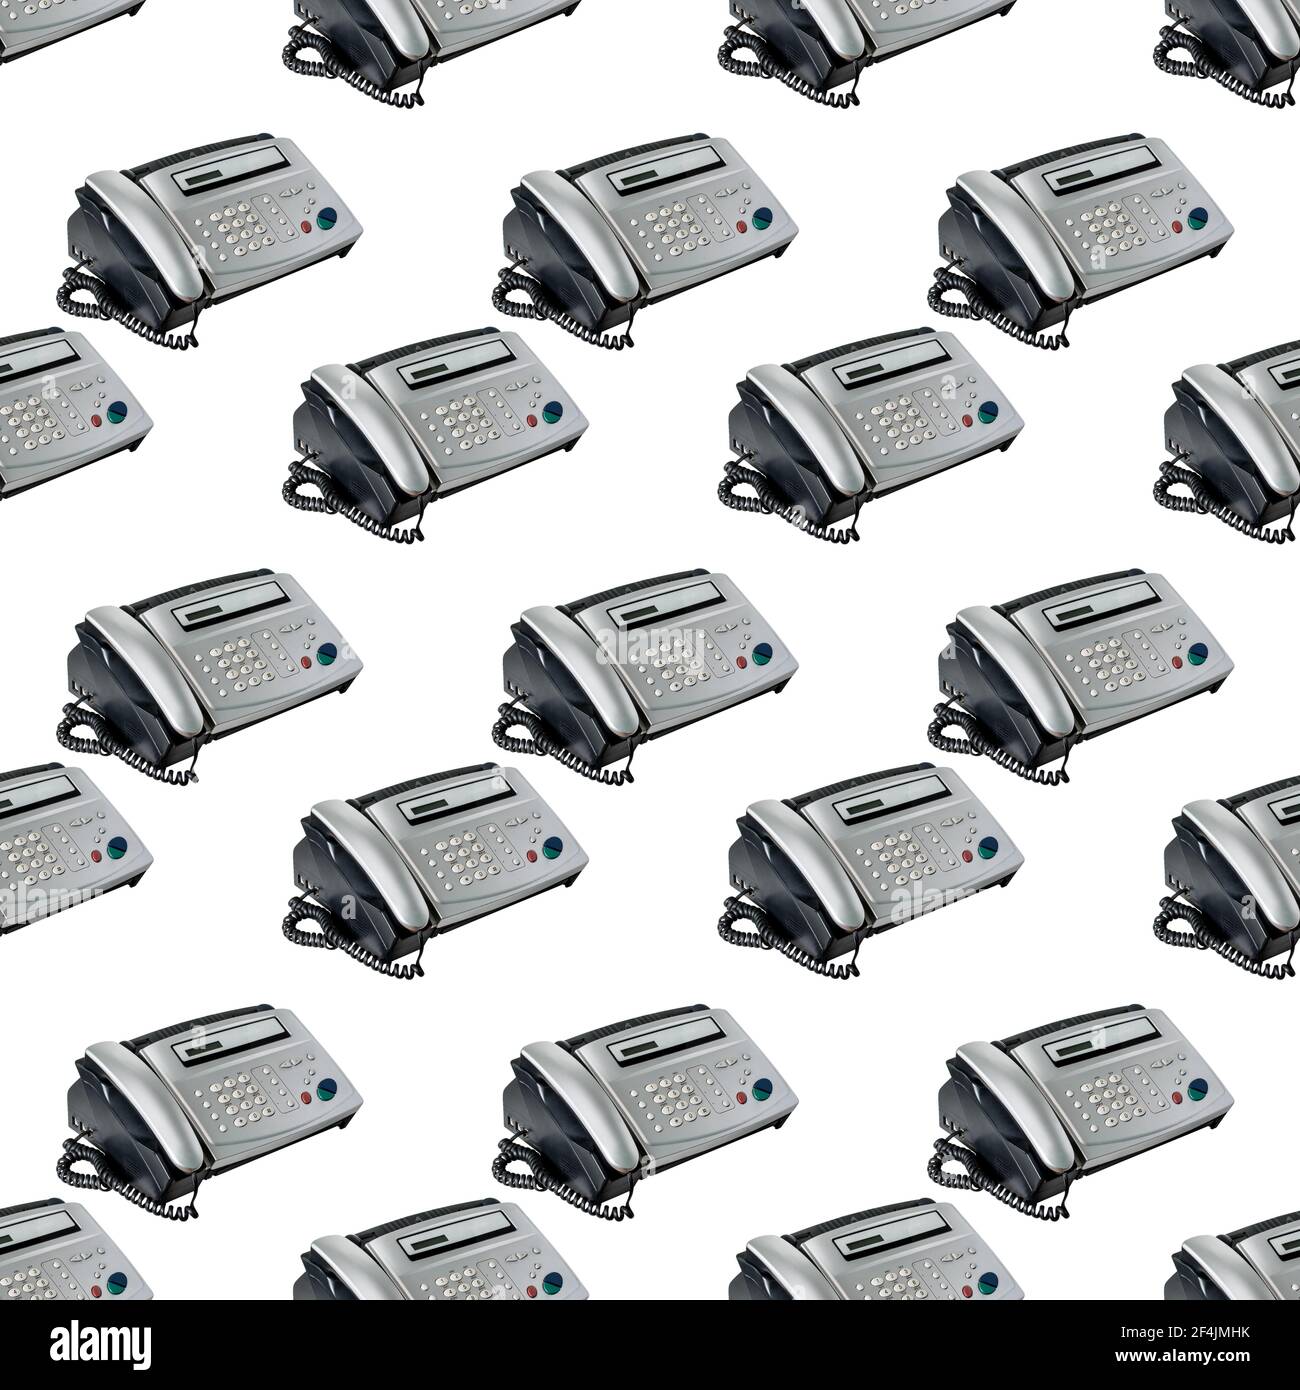 Old office fax machine shot on white background. seamless pattern with Fax. office equipment, Telephone and fax Stock Photo